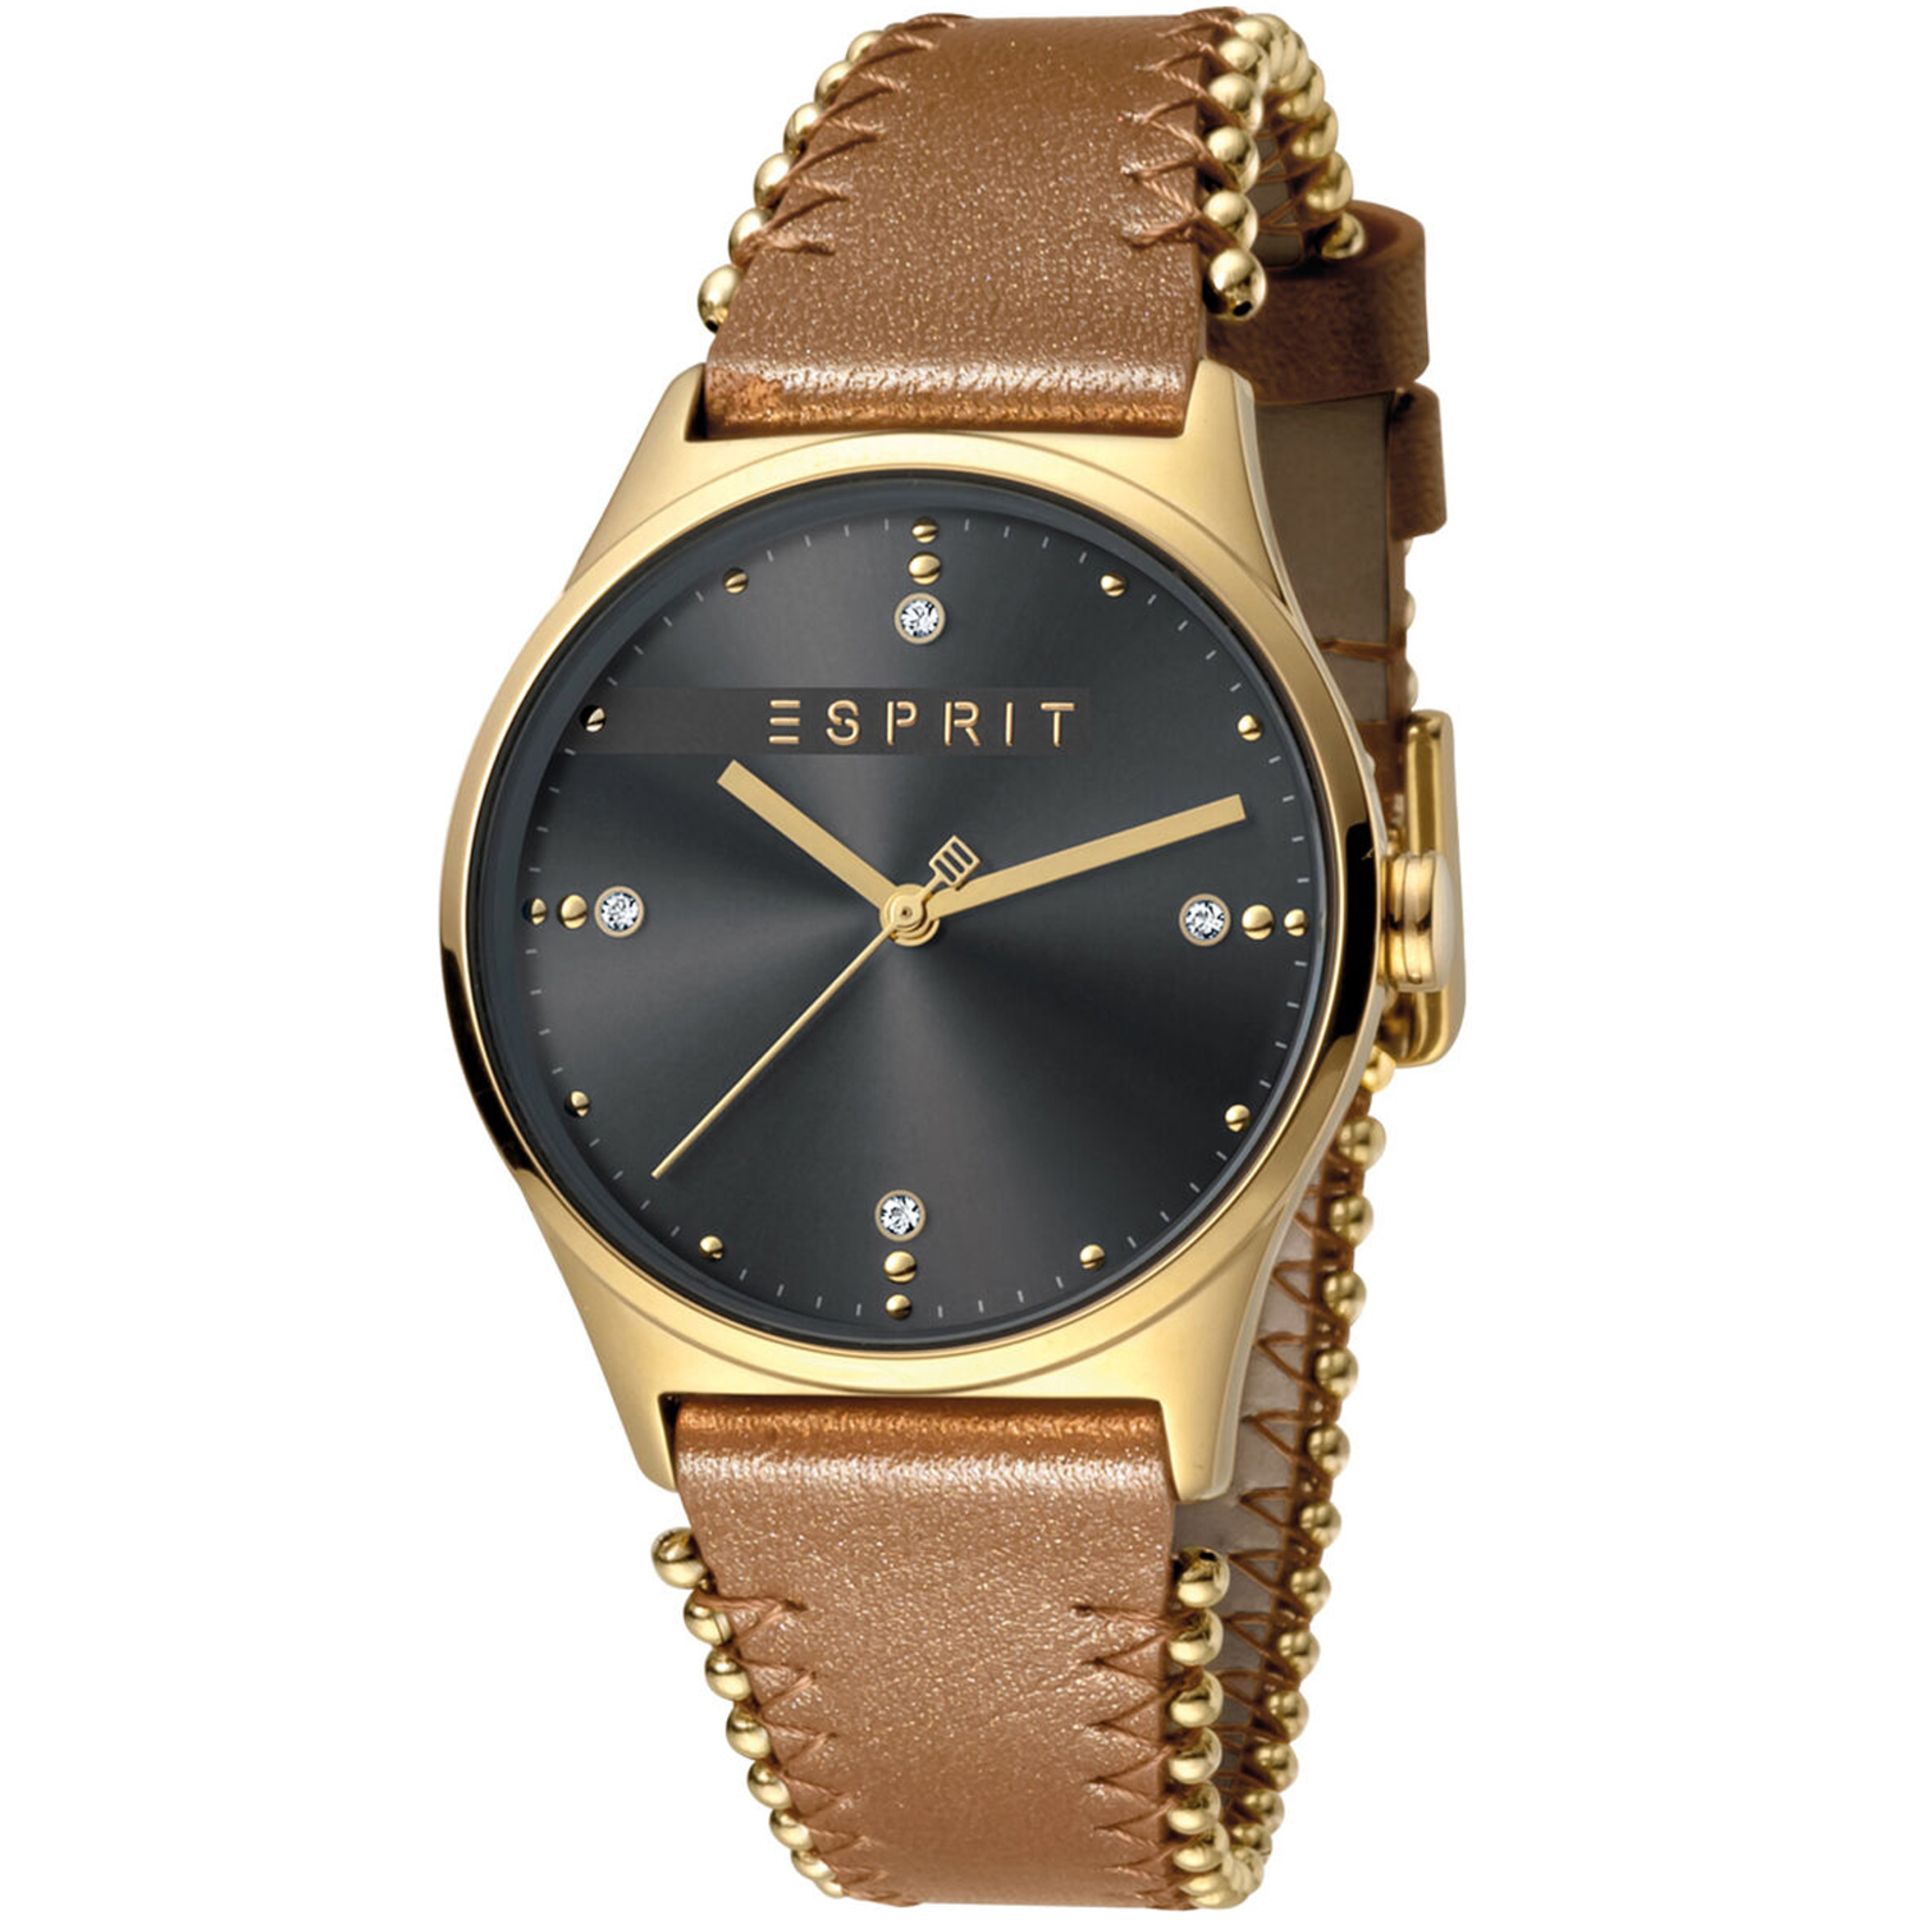 No VAT Brand New Esprit Ladies Watch ES1L032L0035 - Real Leather Strap - Gold Plated Casing - 30M